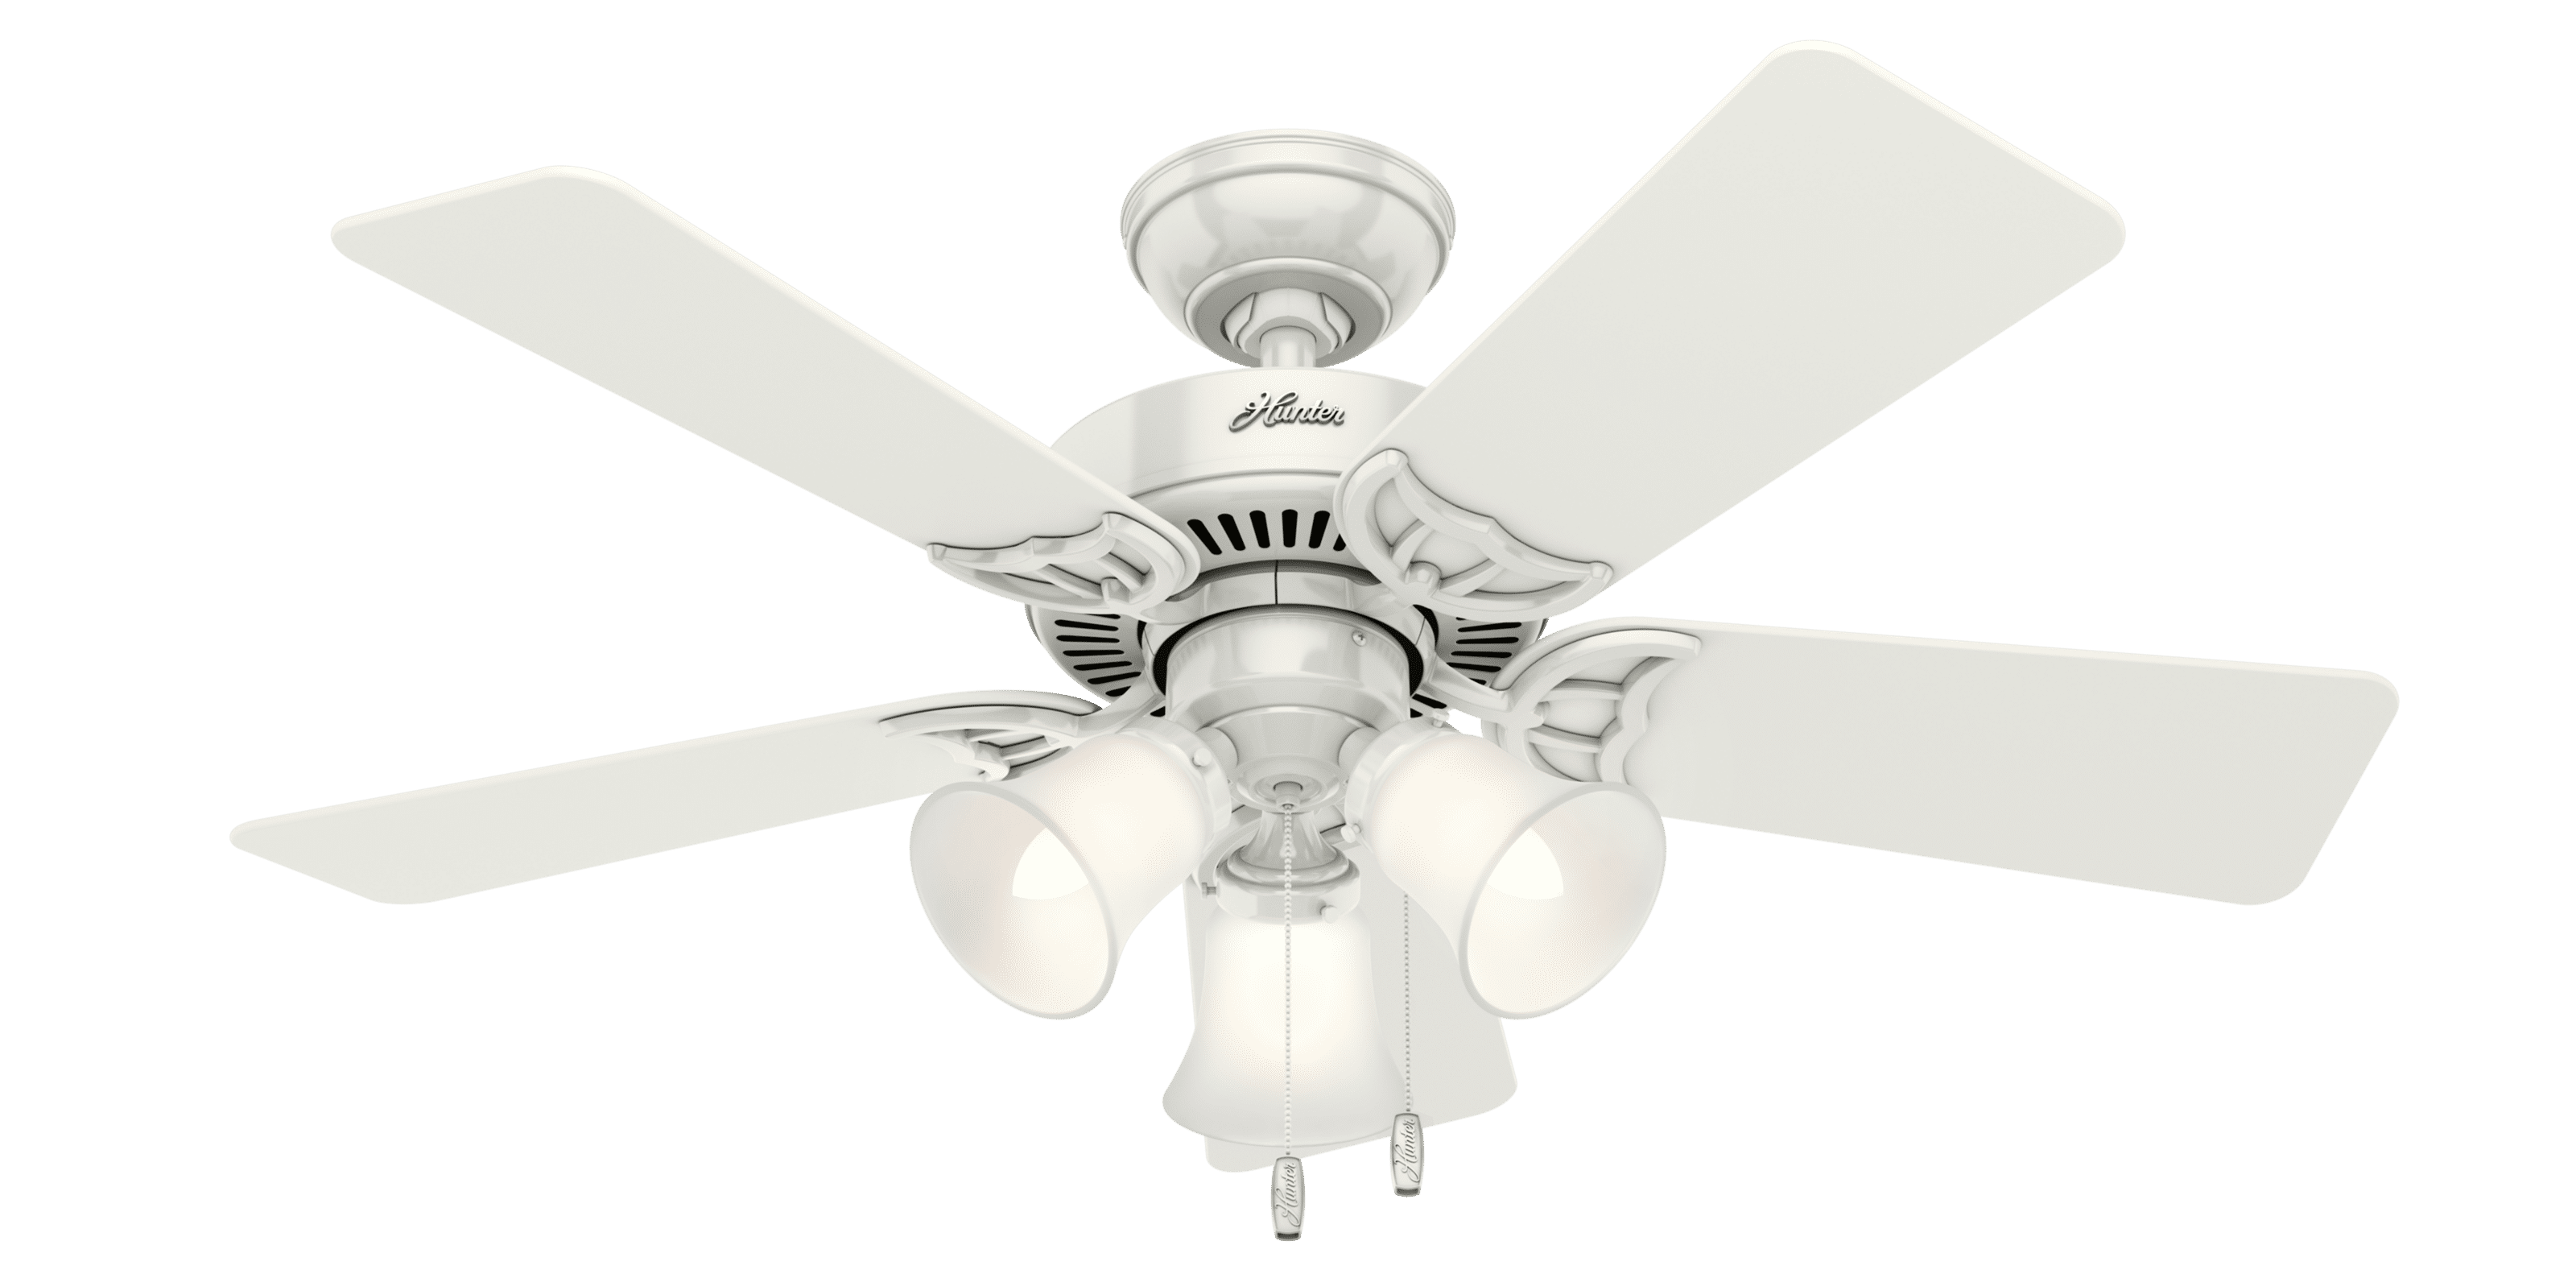 WhisperWind Classic 42" Ceiling Fan with White Oak Blades and Lighting